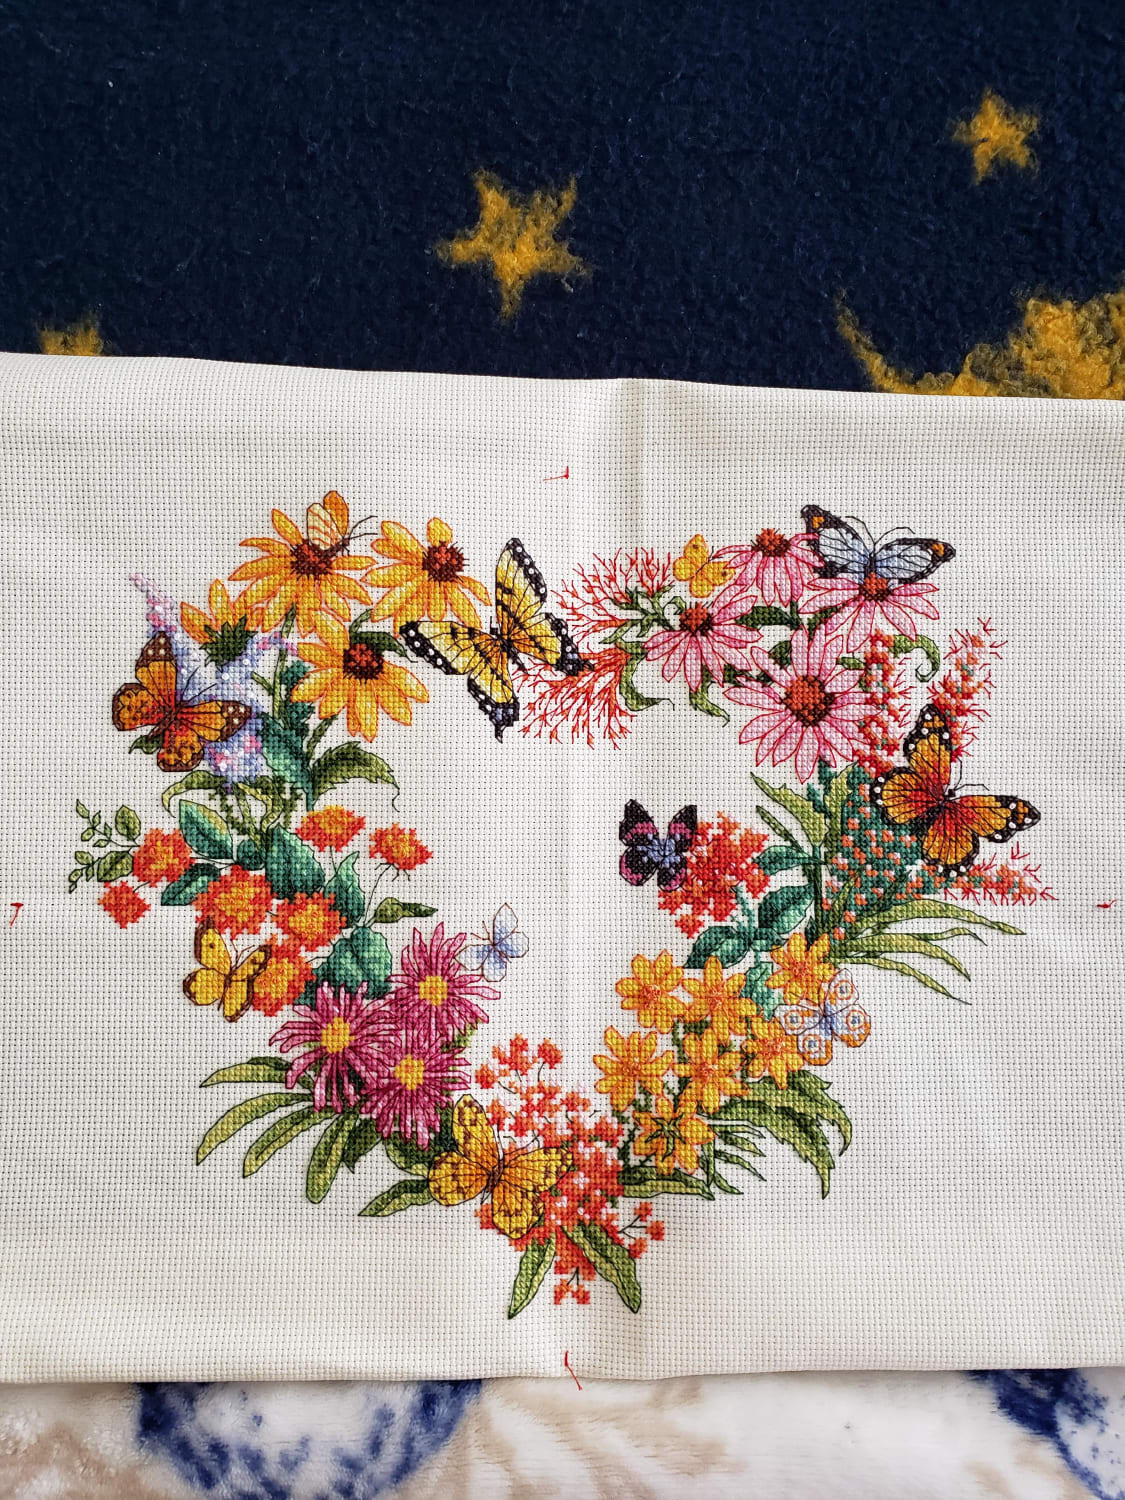 [FO] "Wildflower Wreath" by Dimensions. This was in the storage box also. Was going to be for my office.